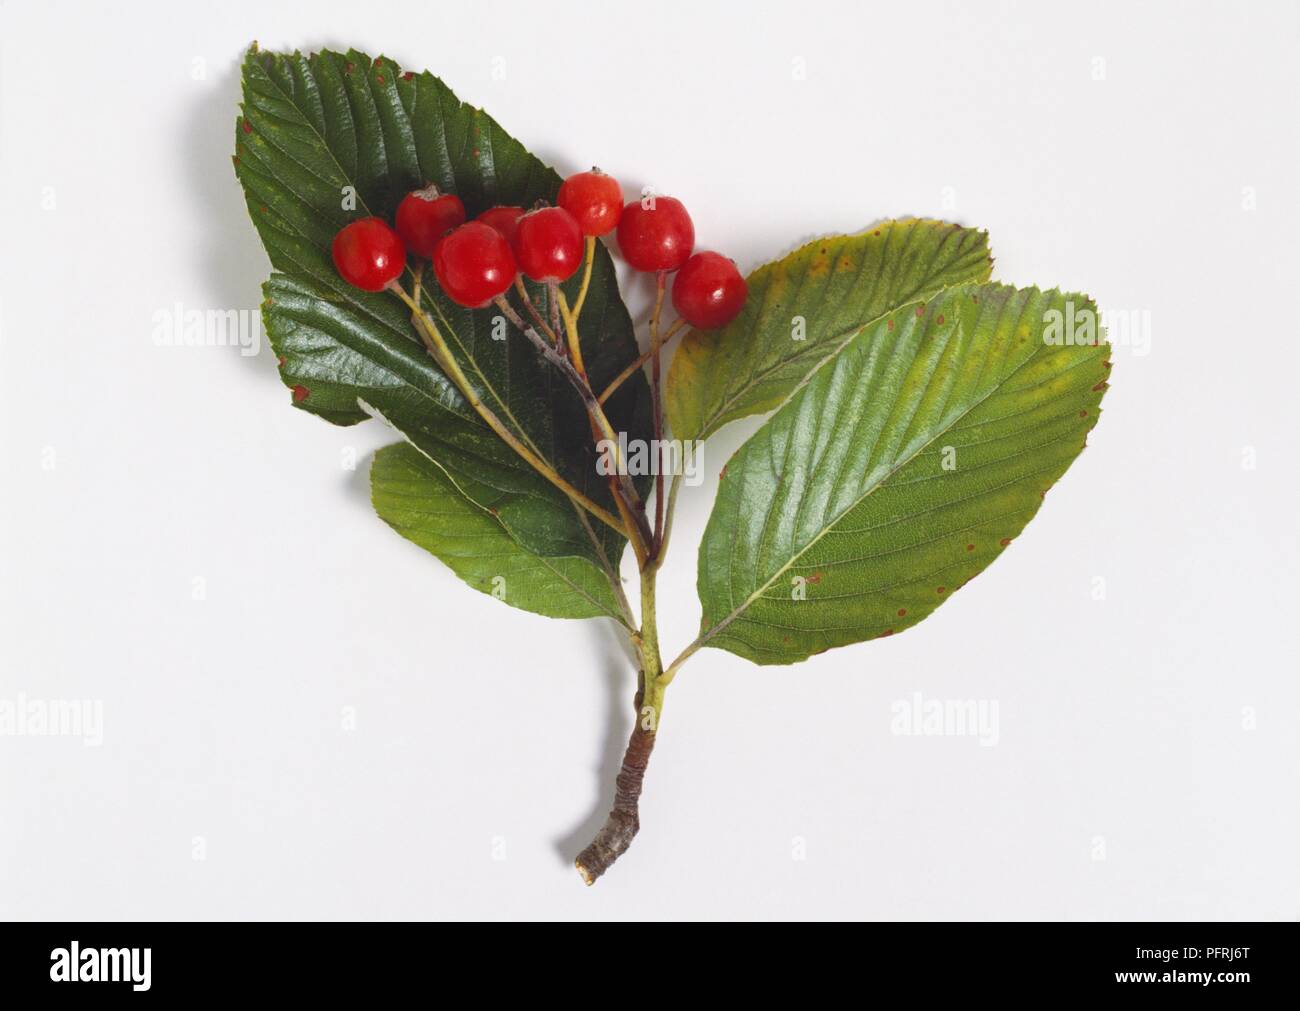 Sorbus aria (Whitebeam), stem with leaves and red fruits Stock Photo